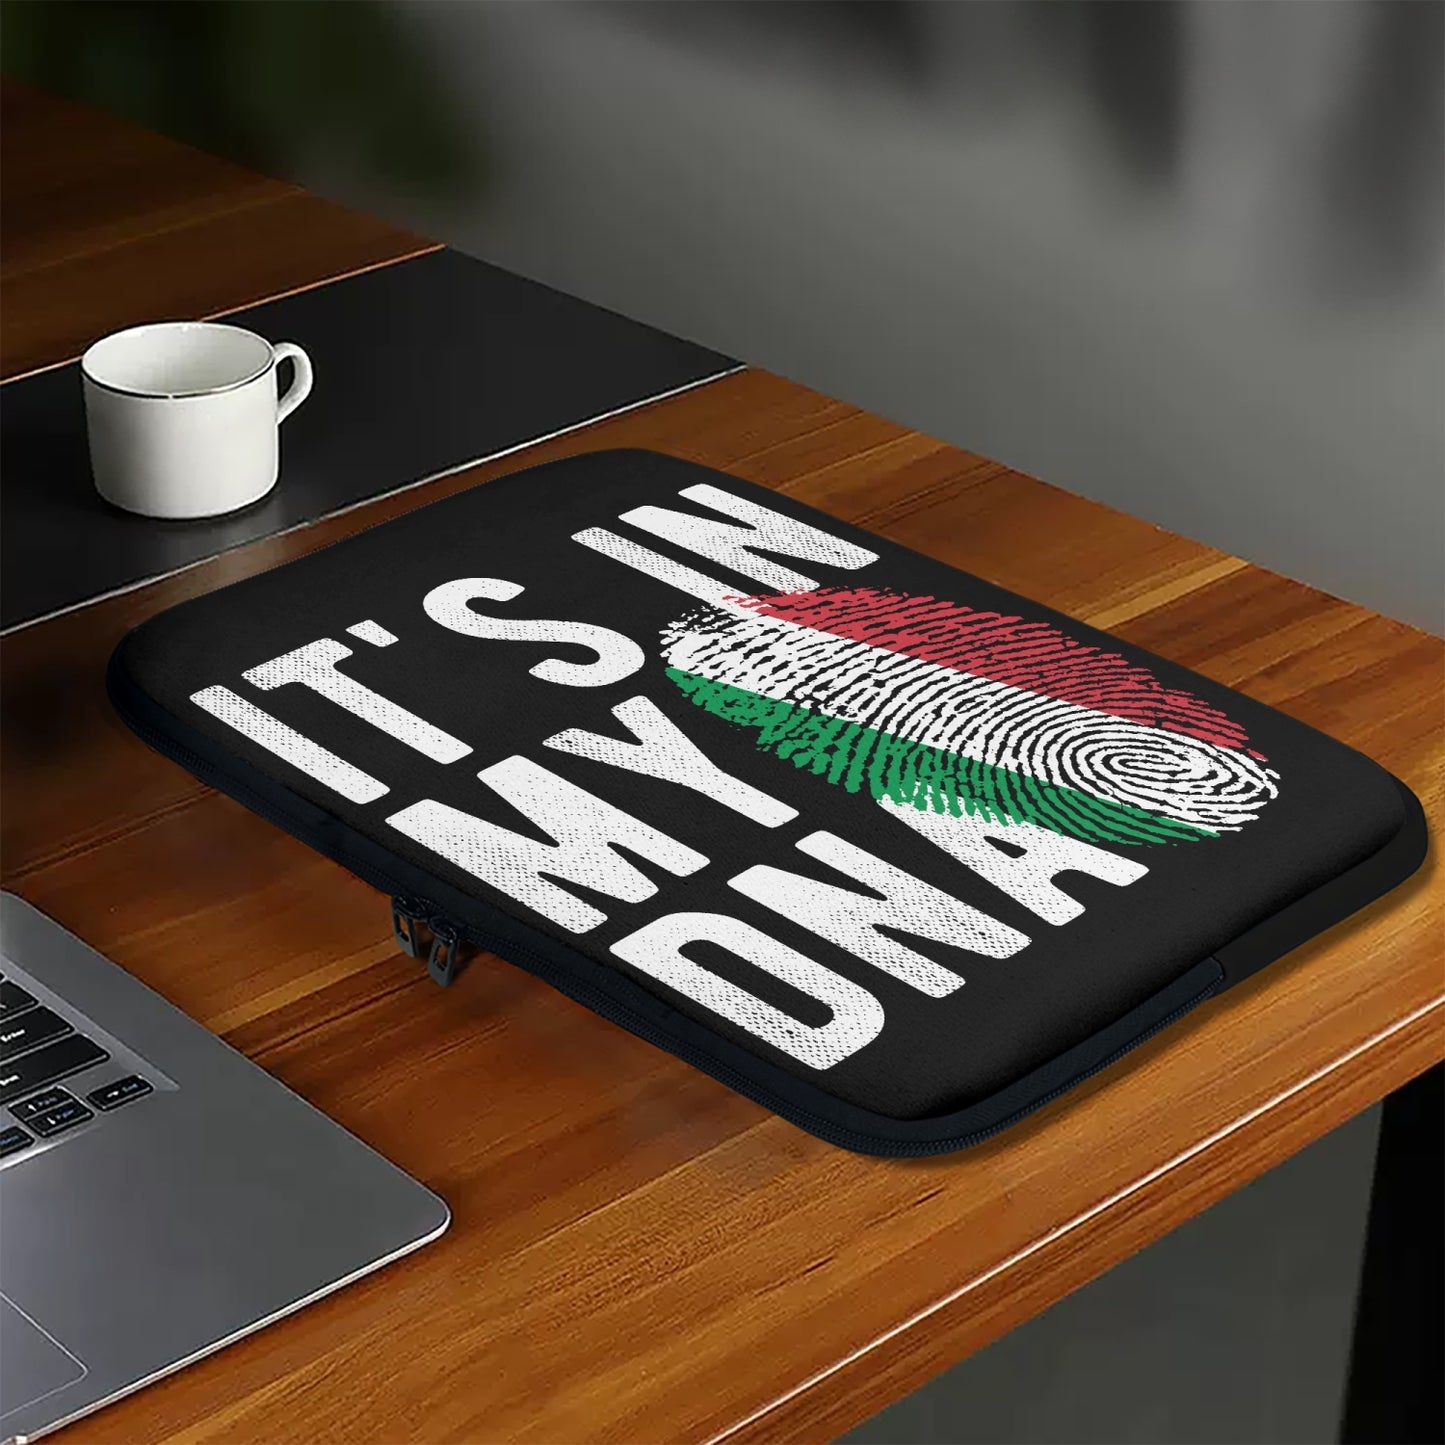 Italy It's in my DNA - Laptop Sleeve